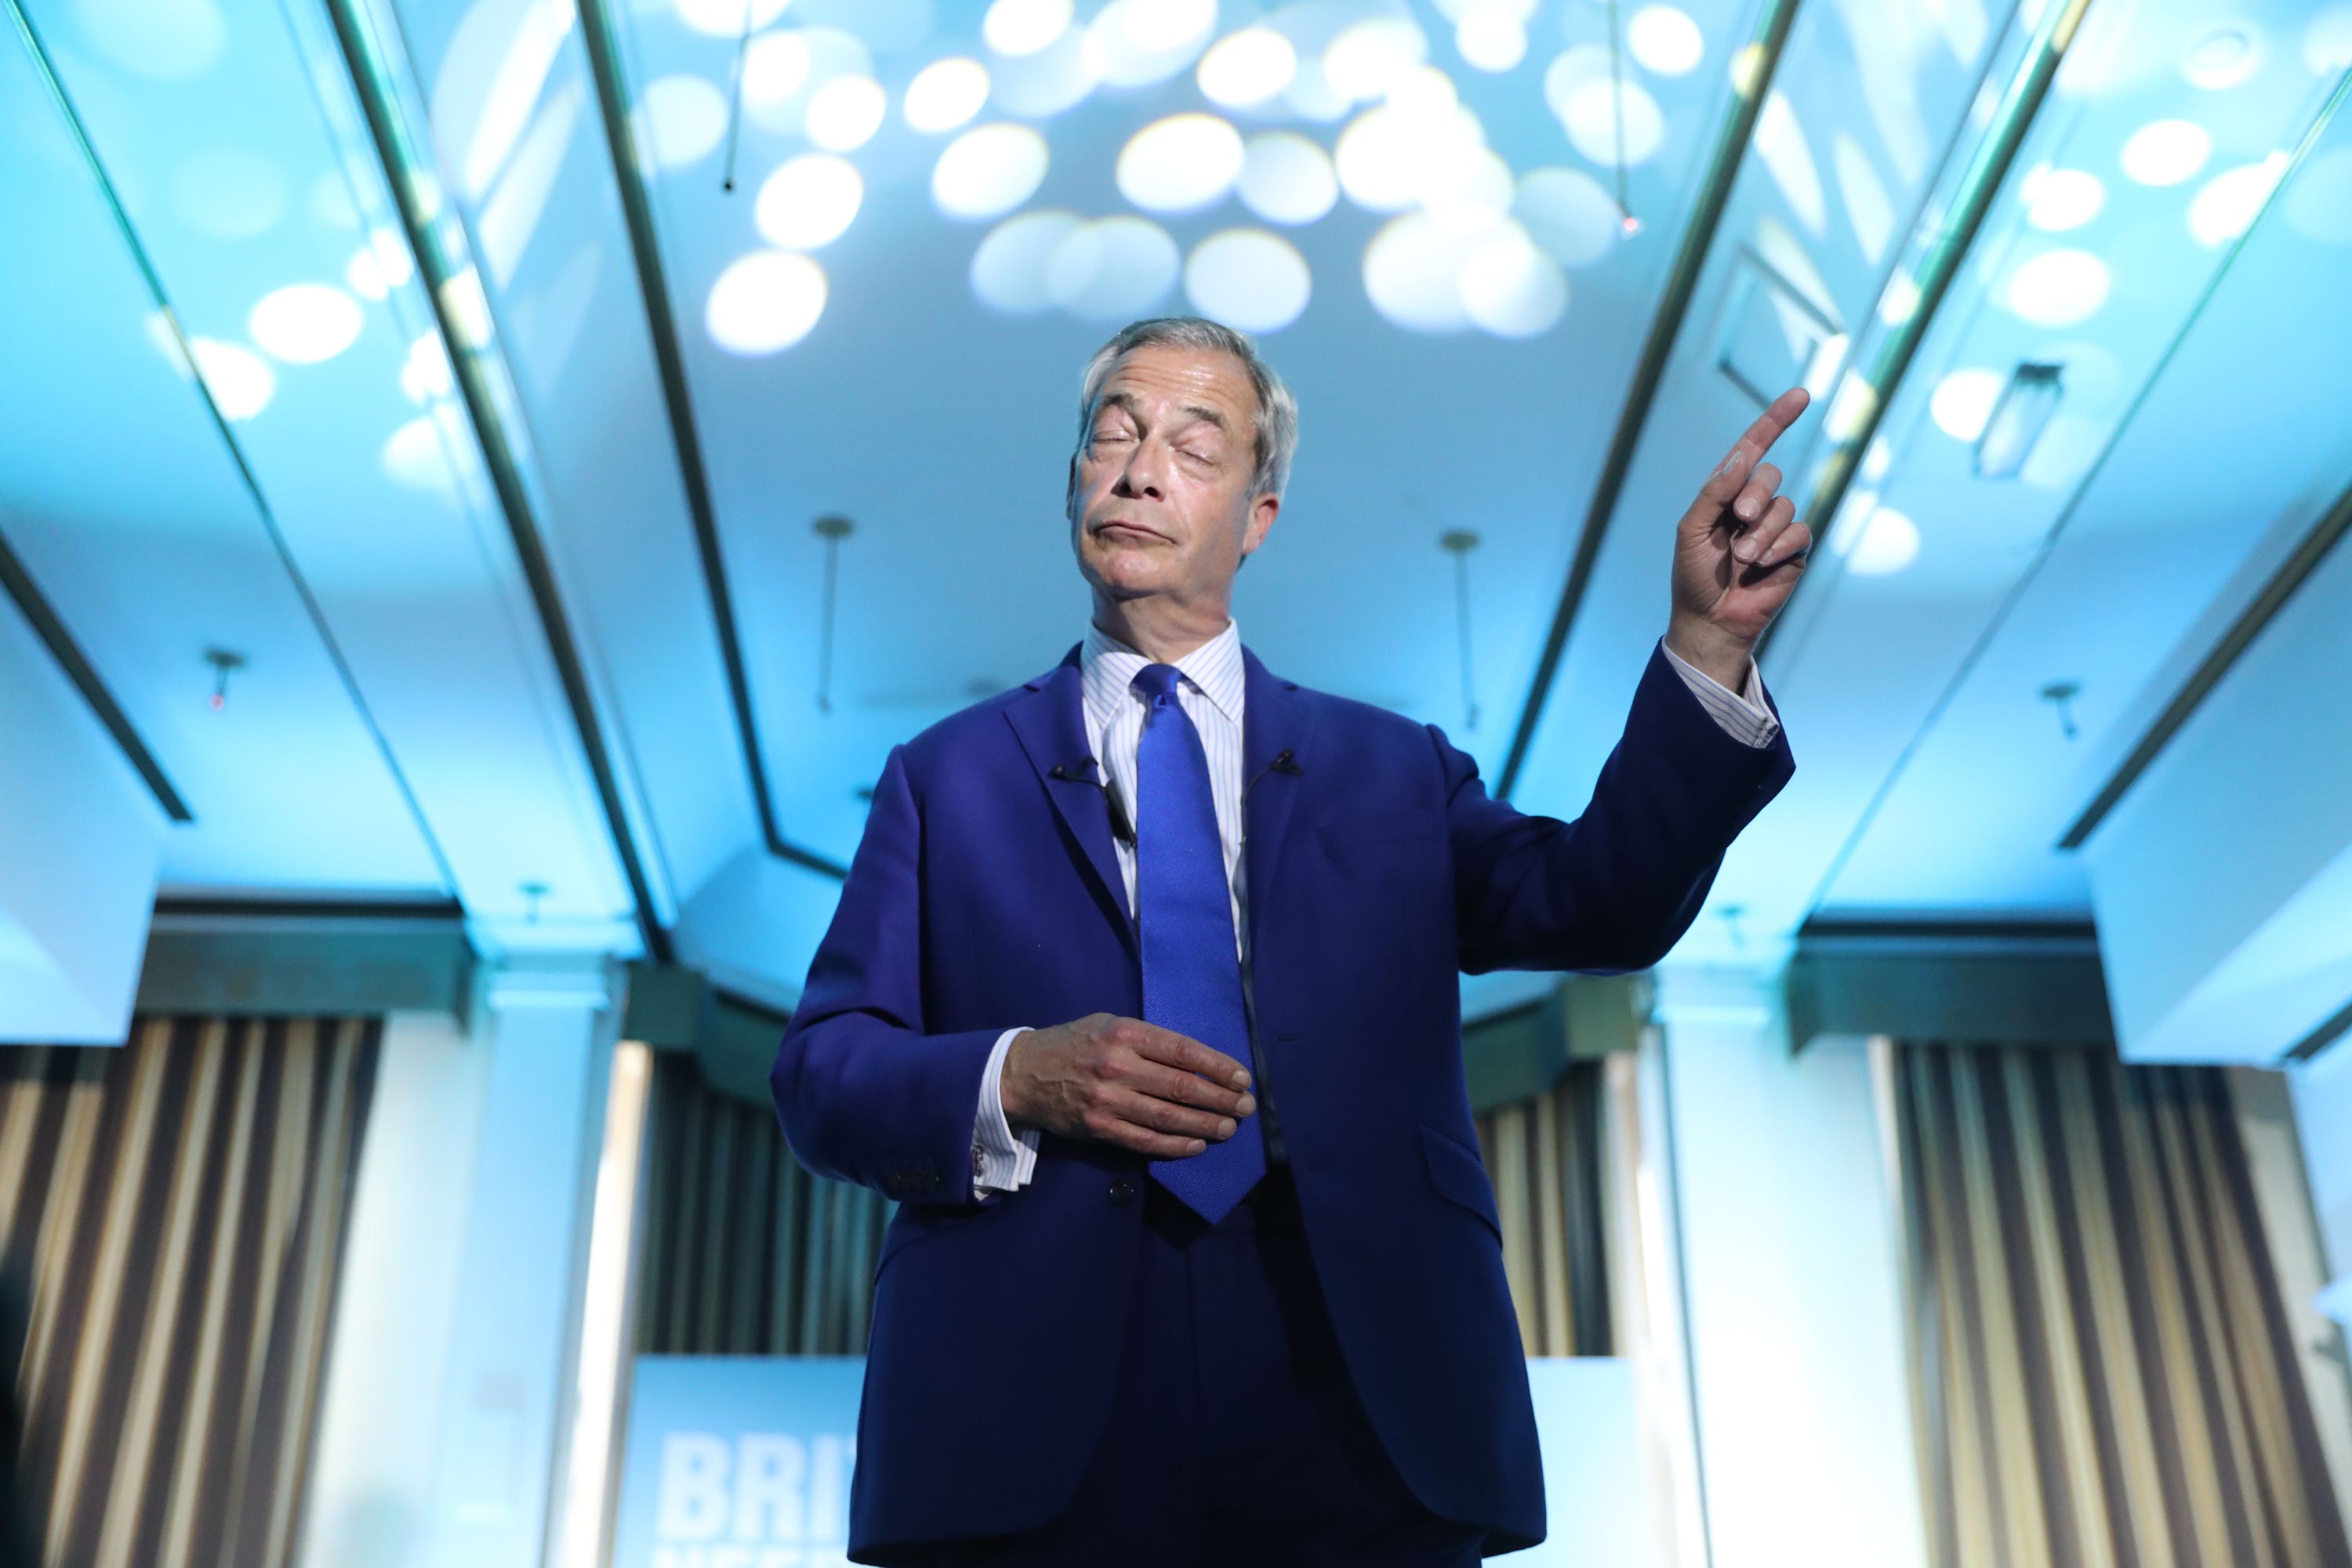 Reform UK leader Nigel Farage speaks at an event at the Imperial Hotel in Blackpool (Tim Markland/PA)